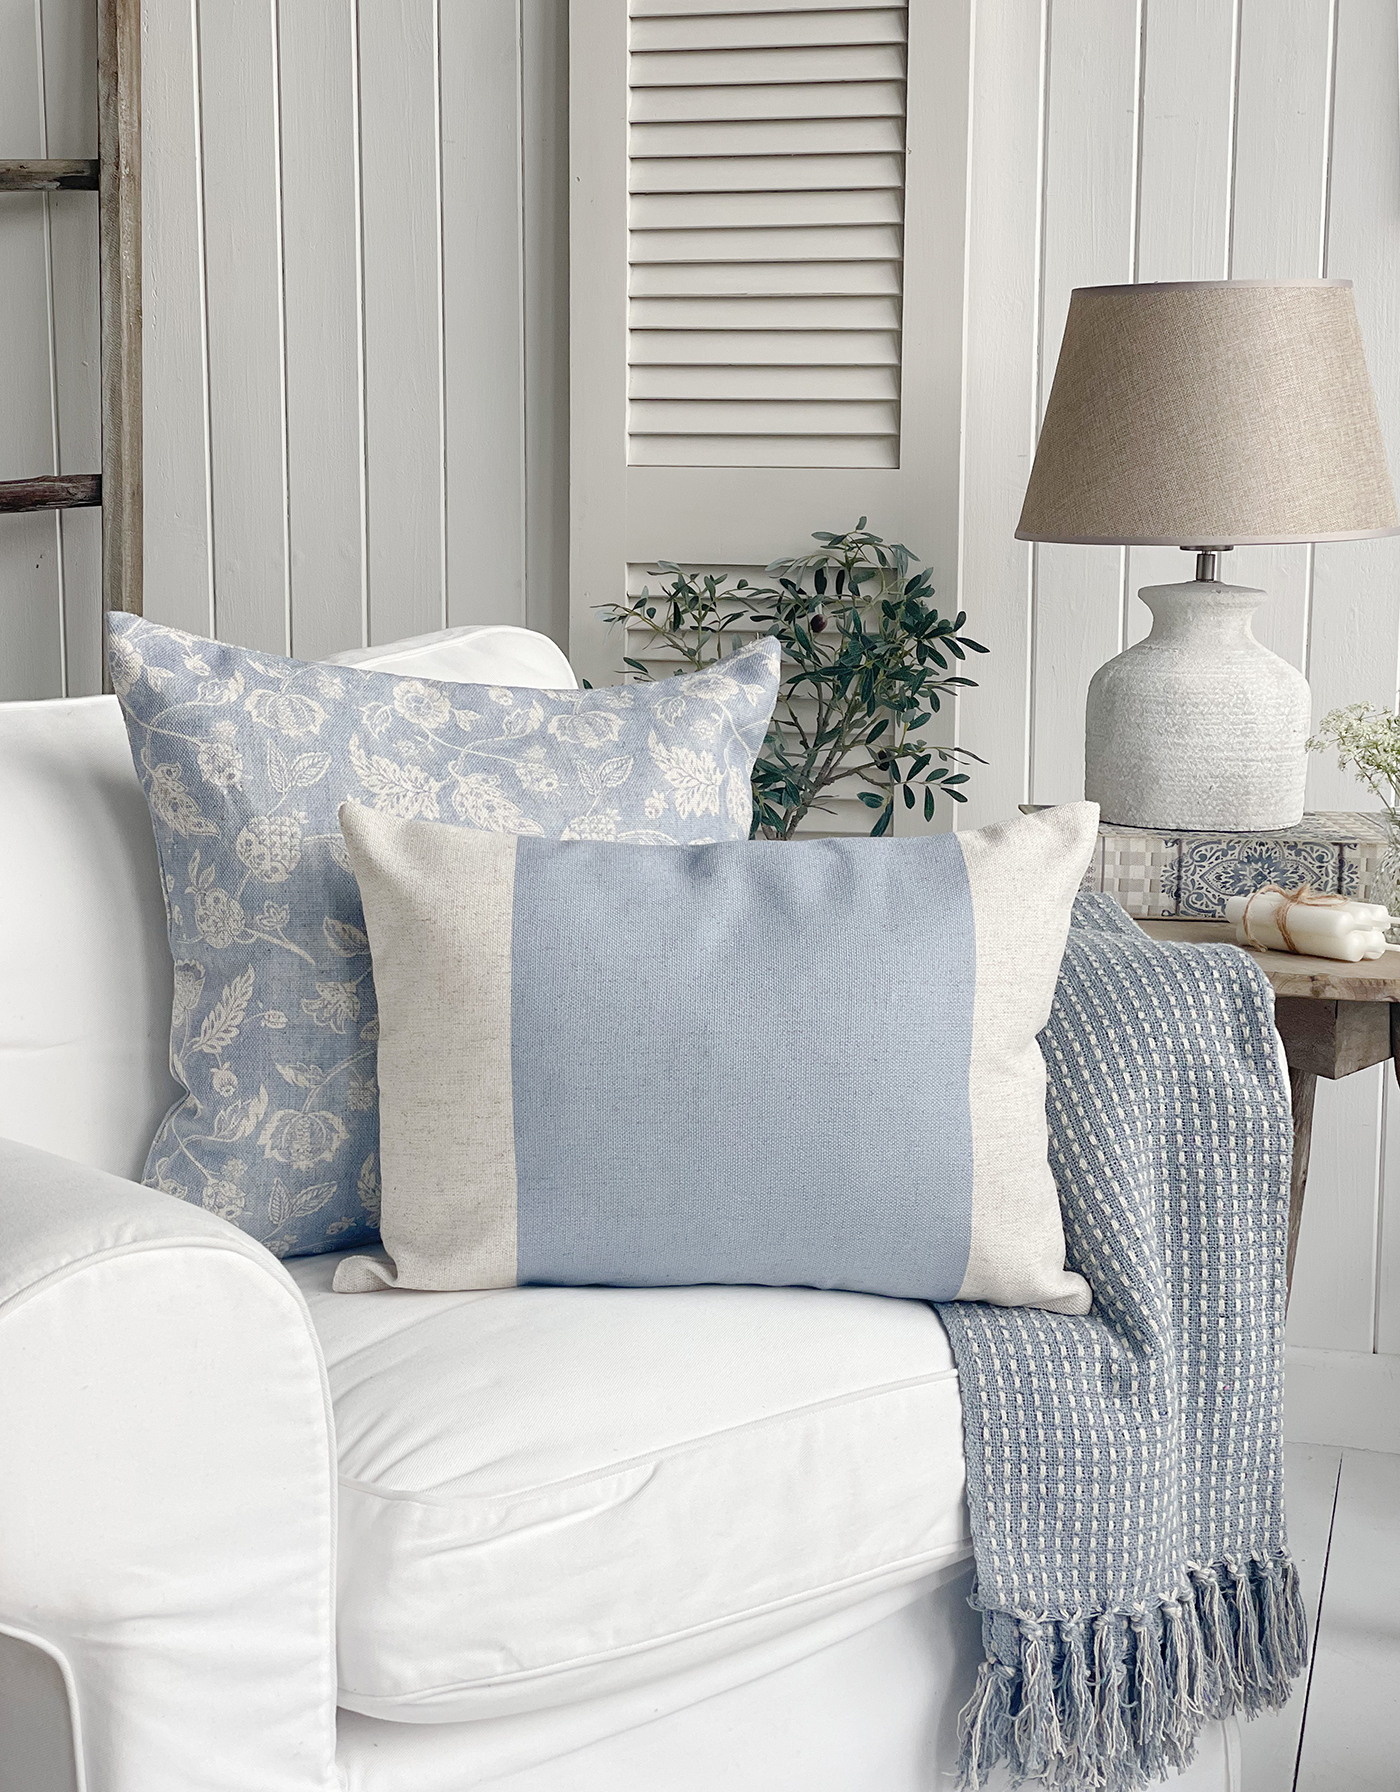 New England Meredith cushions in pale blue and natural.